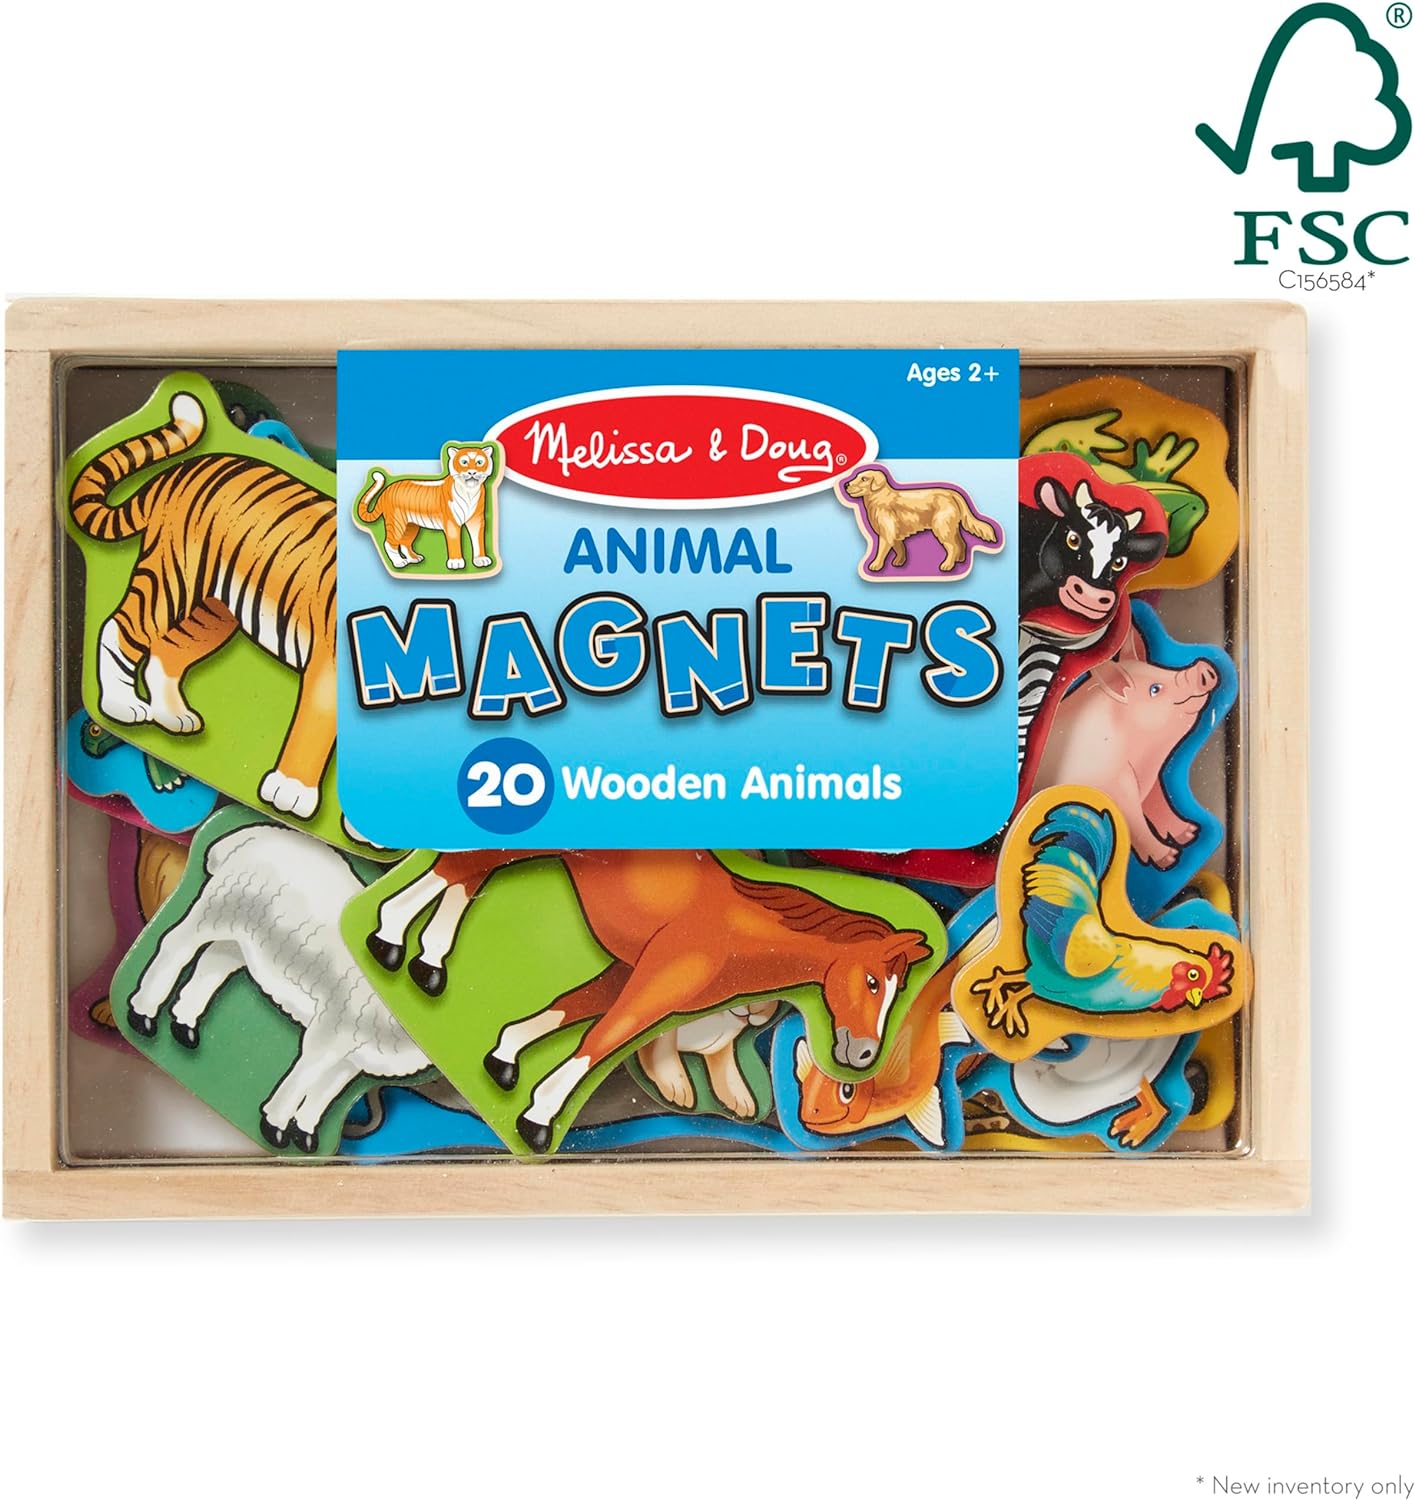 Melissa & Doug 20 Wooden Animal Magnets in a Box - Cute Animal Fridge, Refrigerator Magnets For Toddlers Ages 2+